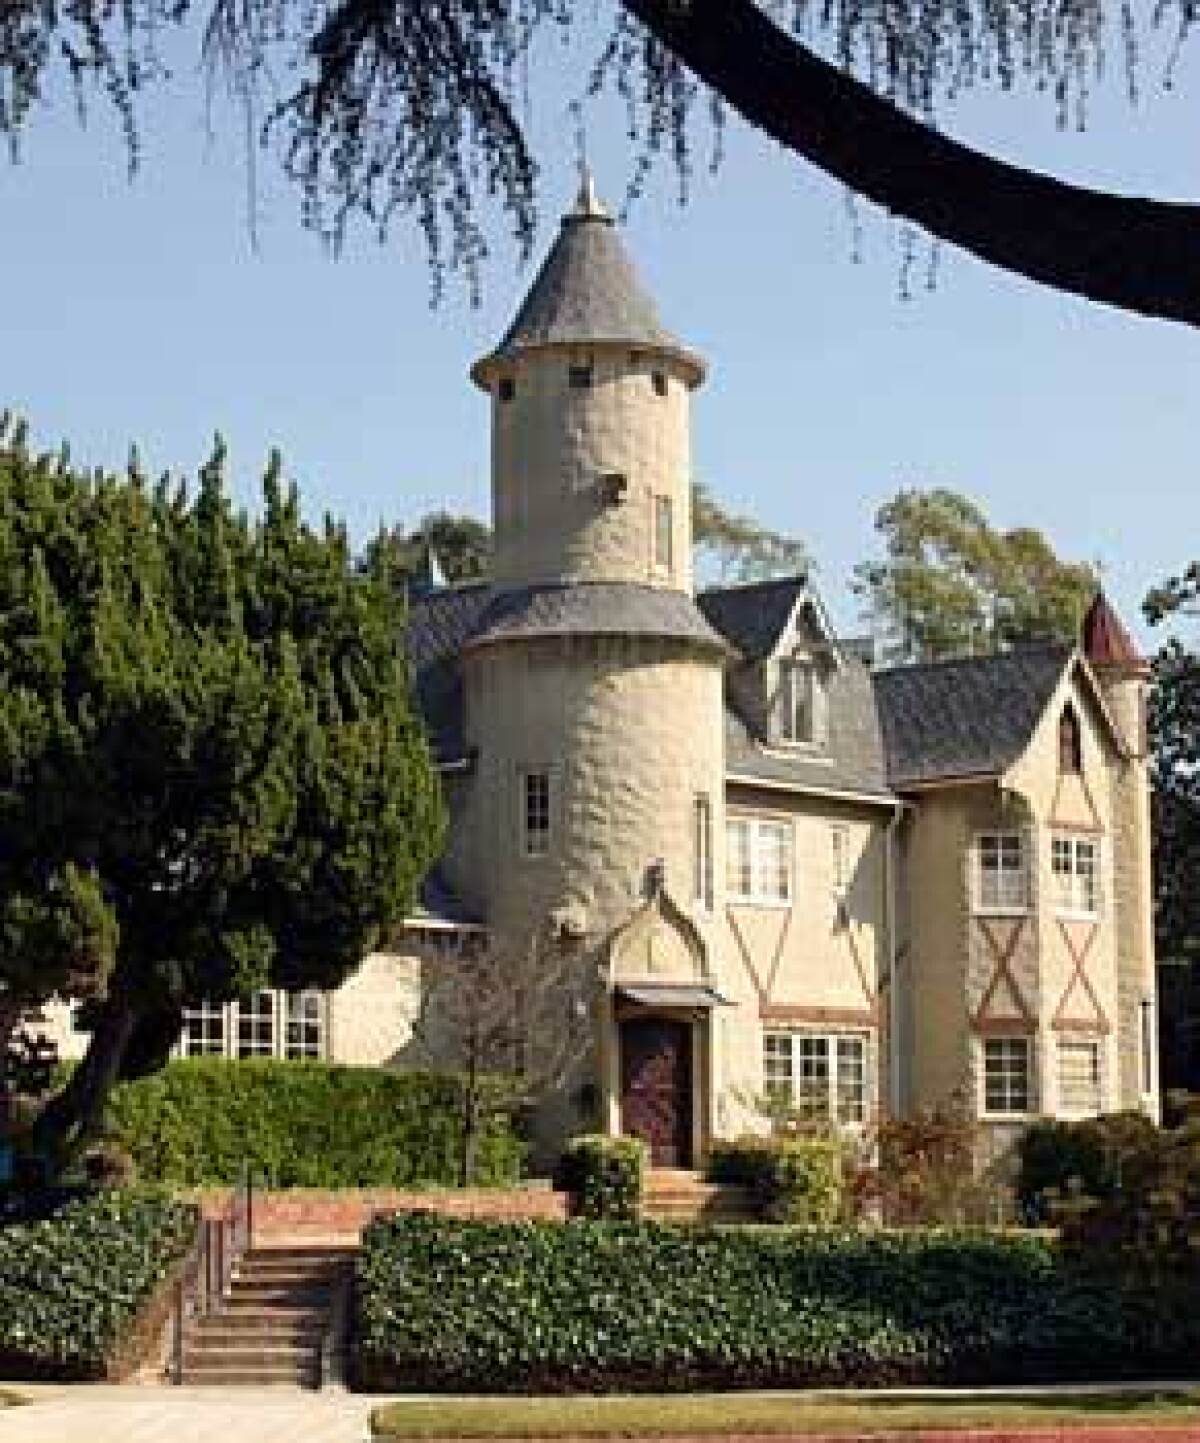 This castle-style house is a standout among the 400 homes in the 1920s neighborhood of Brookside.